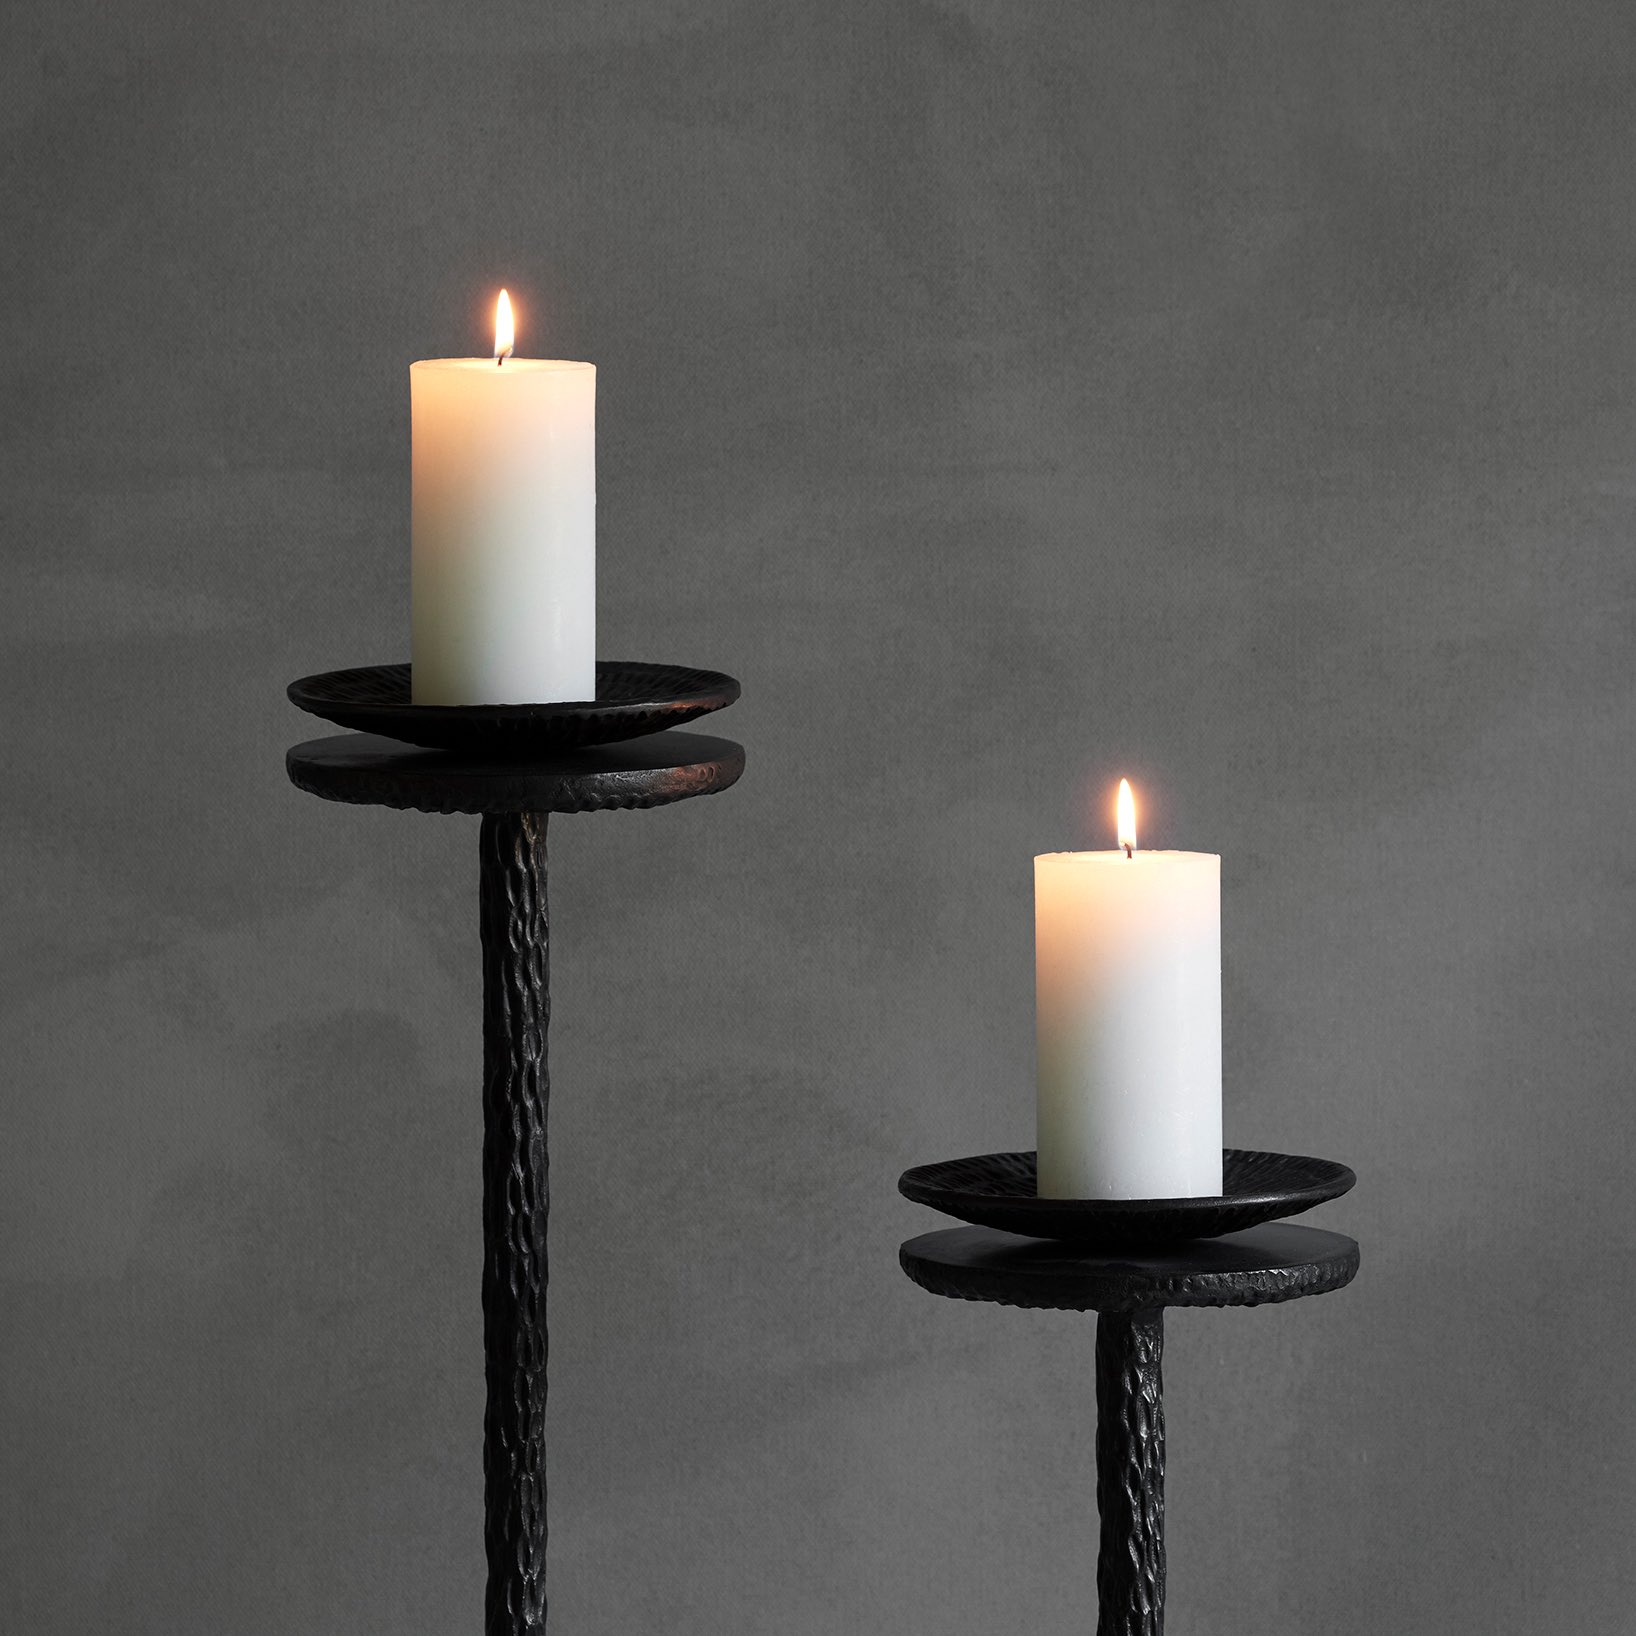 MATHIEU-DELACROIX-HALO-CANDLESTICKS_COLLECTION_PARTICULIERE-CREDIT_PHOTO-F_AMIAND